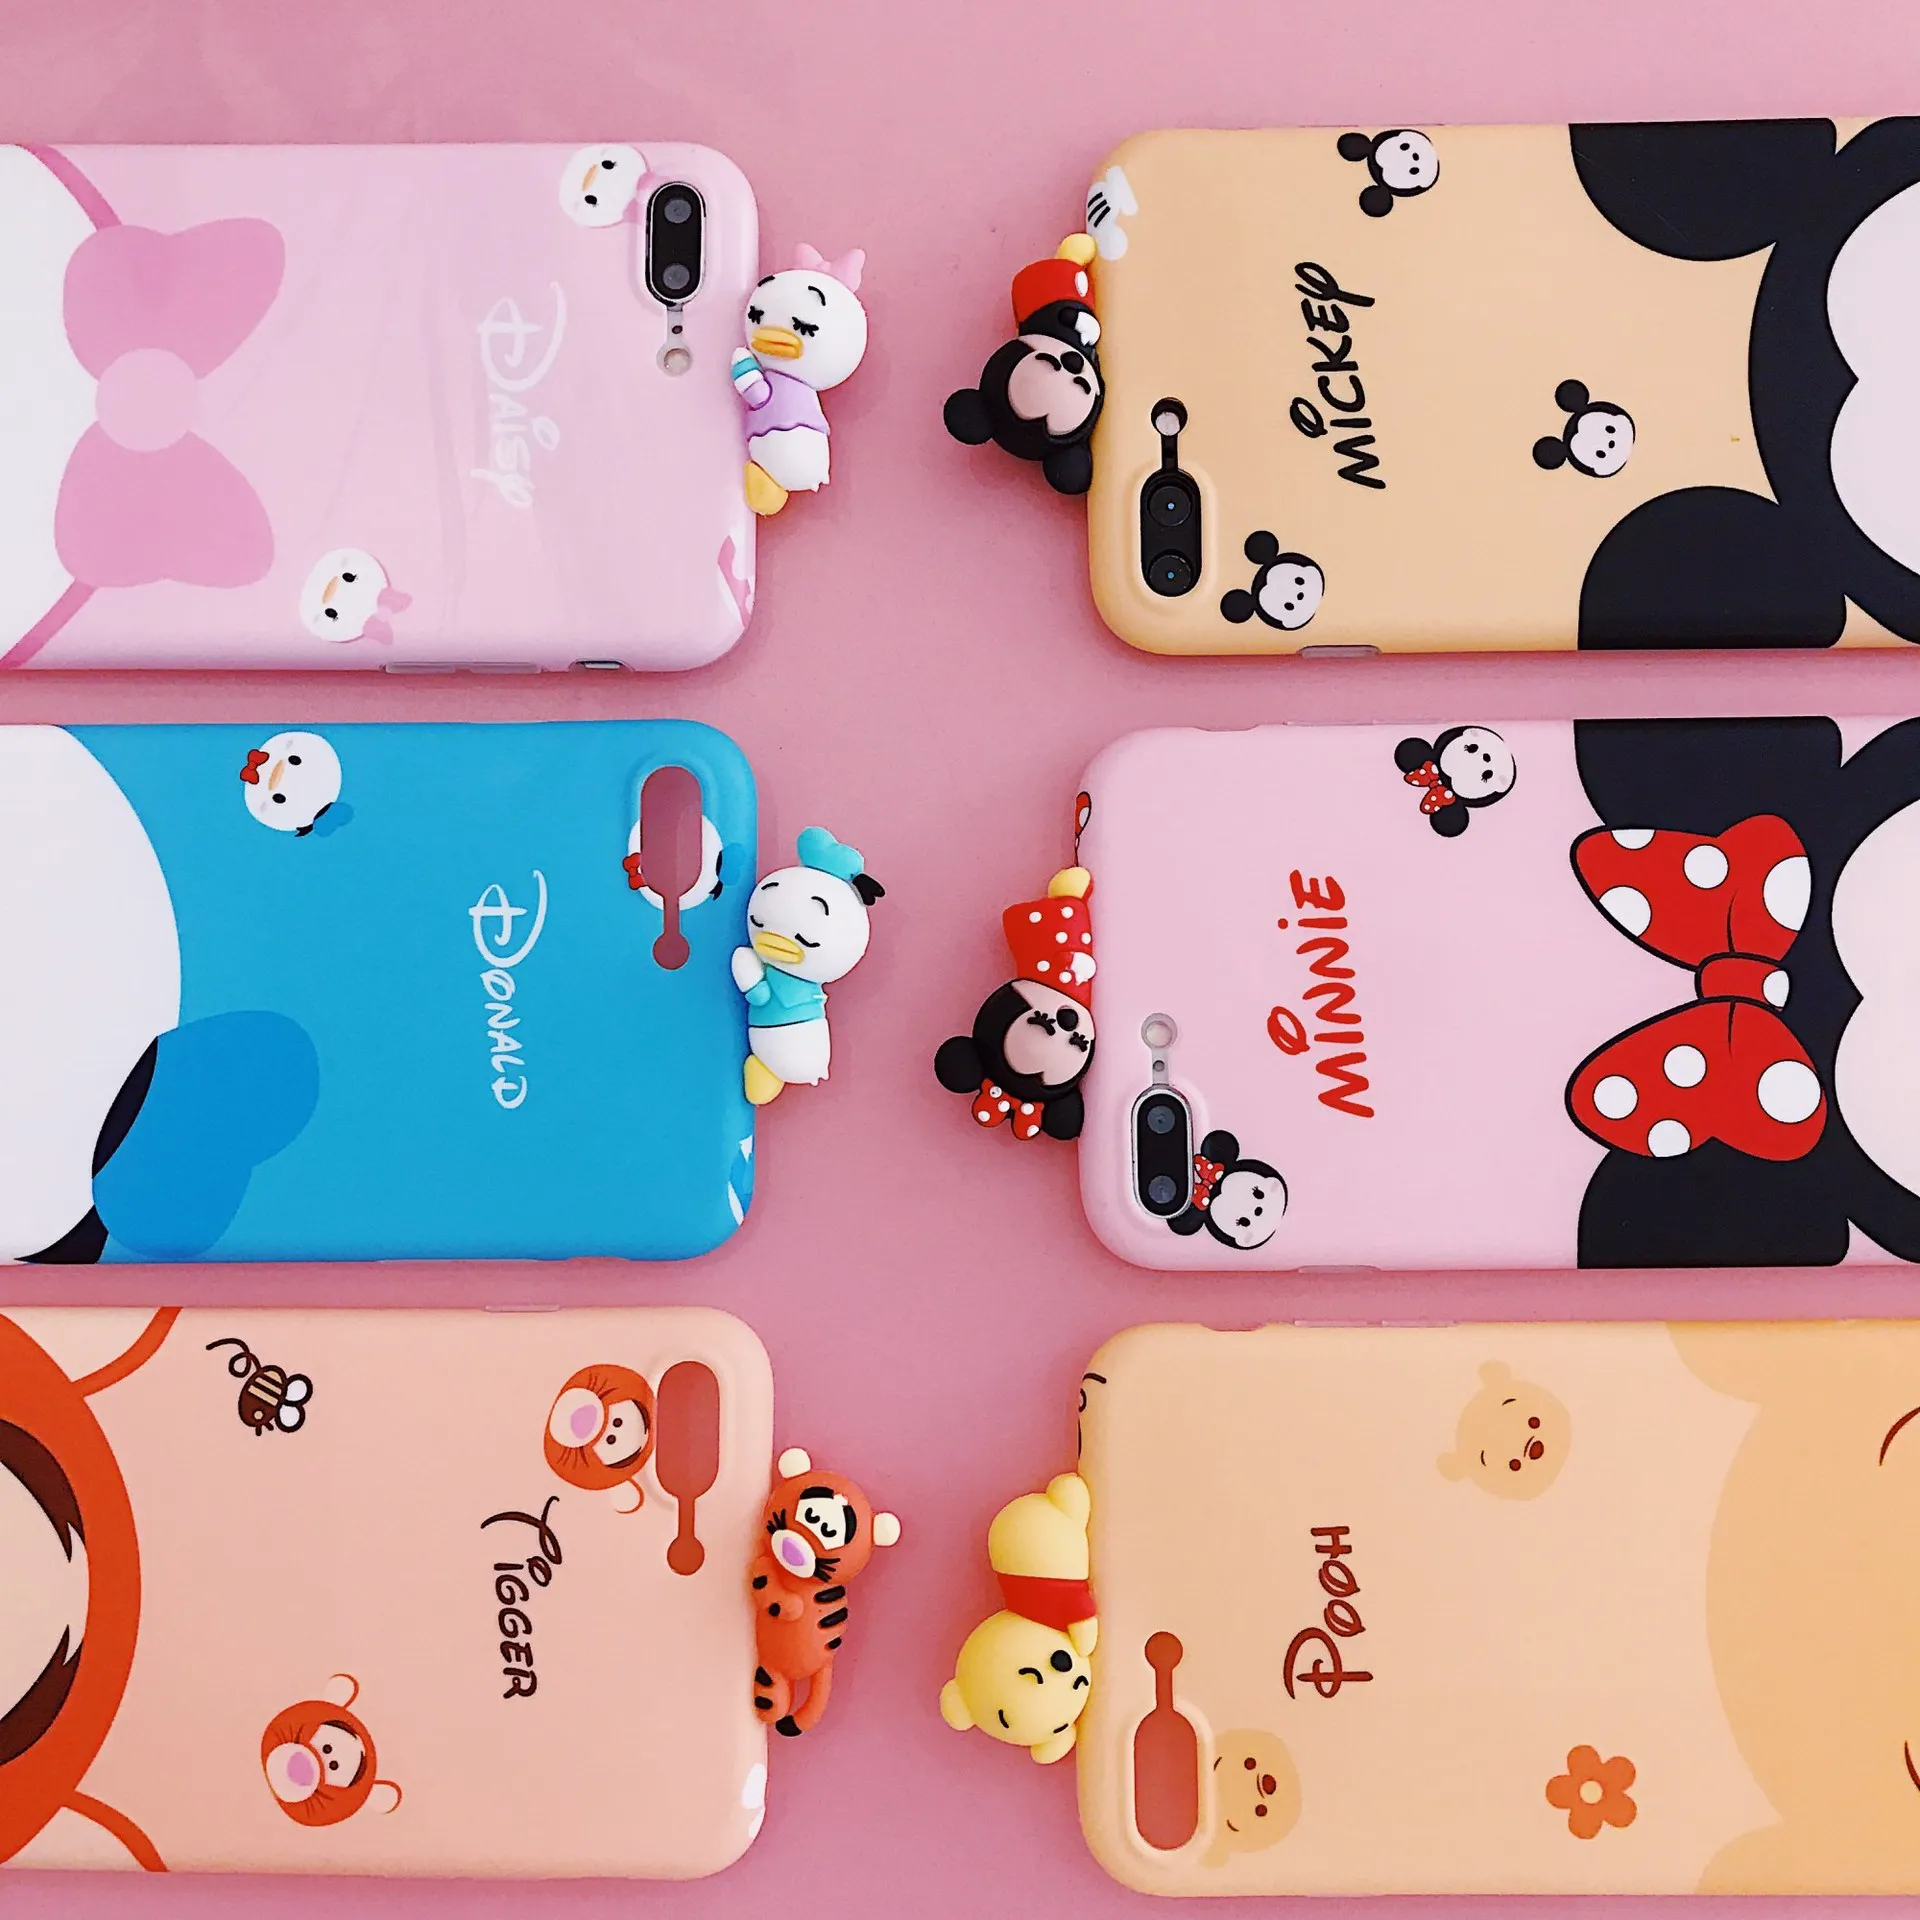 

3D Doll cute Lovers sleep Mickey Minnie Daisy Duck soft tpu case cover for iPhone X Xr Xs Max 6 6s 7 8Plus, Colorful